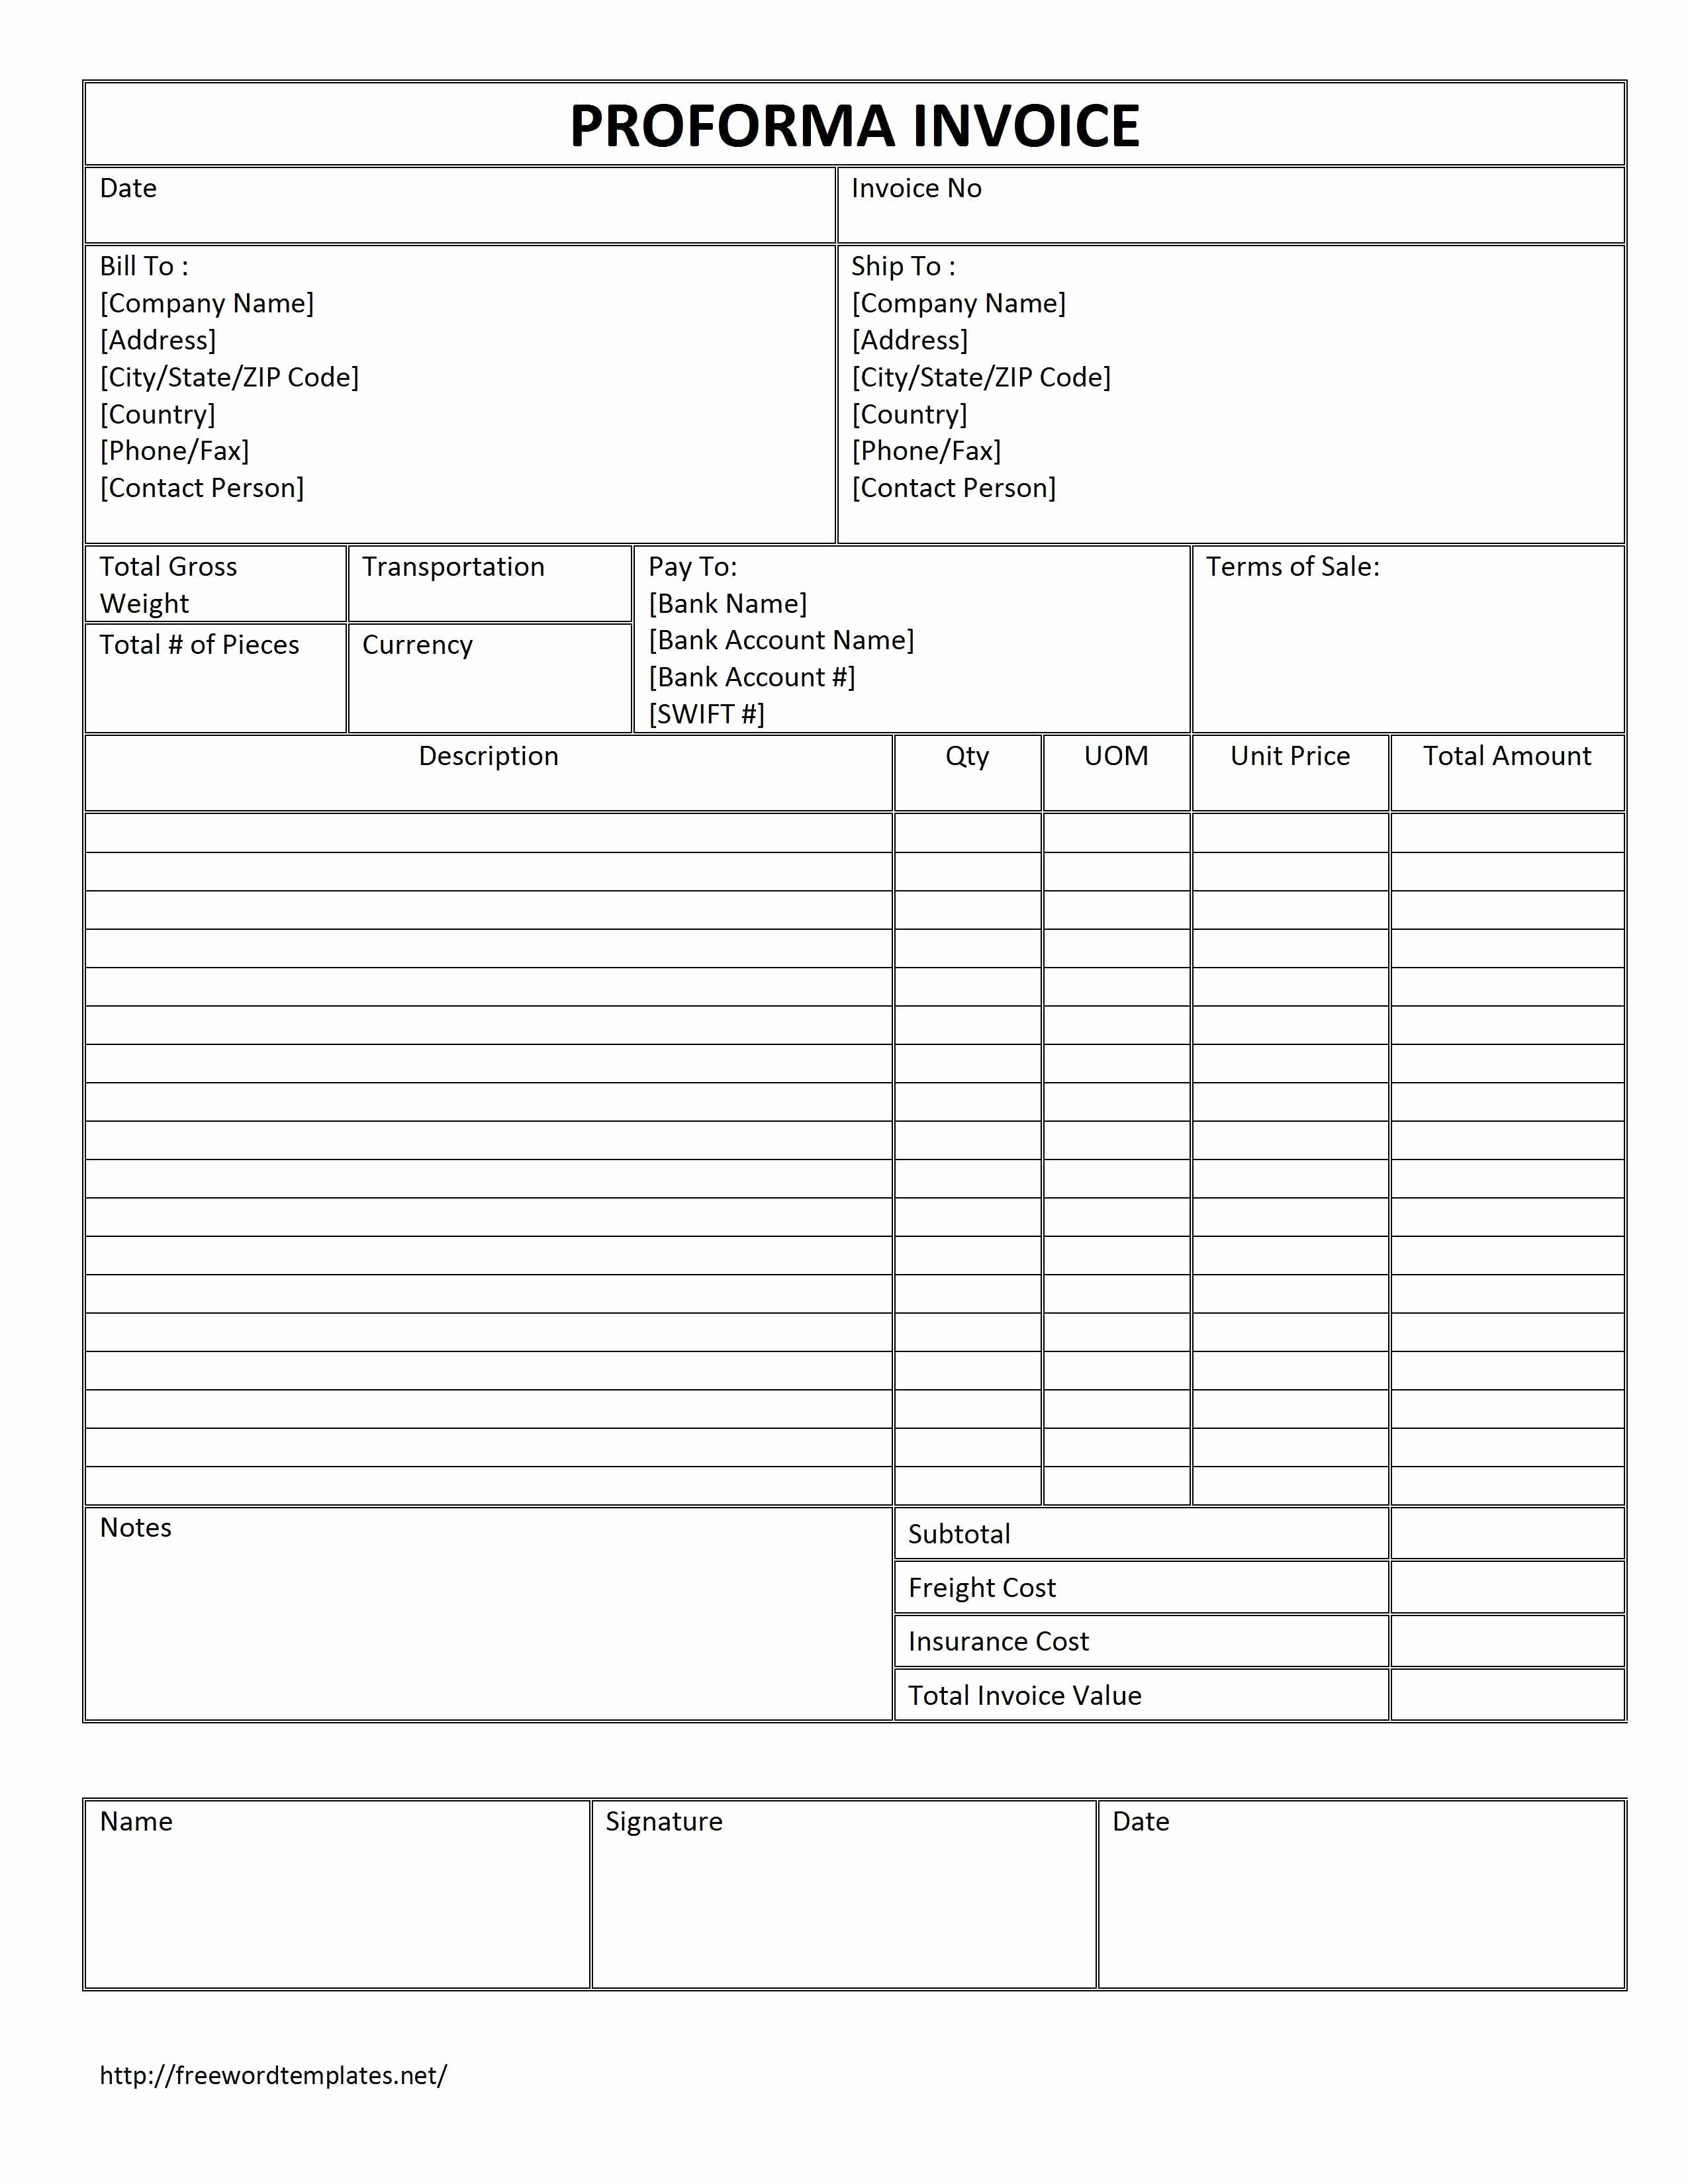 Invoice Template Word Download Free Best Of Proforma Invoice Template Free Download Free Proforma